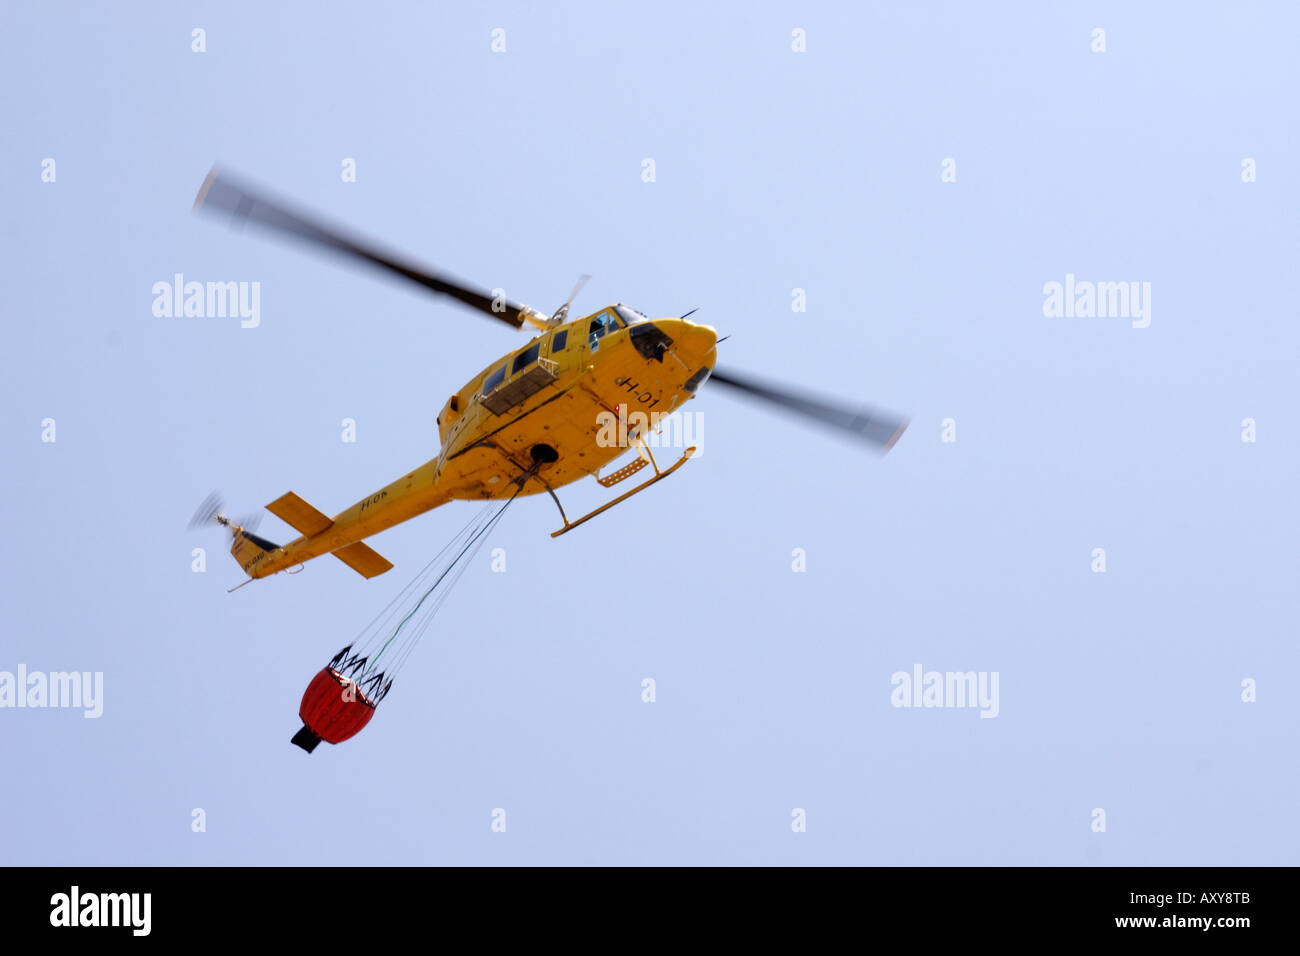 Firefighting helicopter Stock Photo